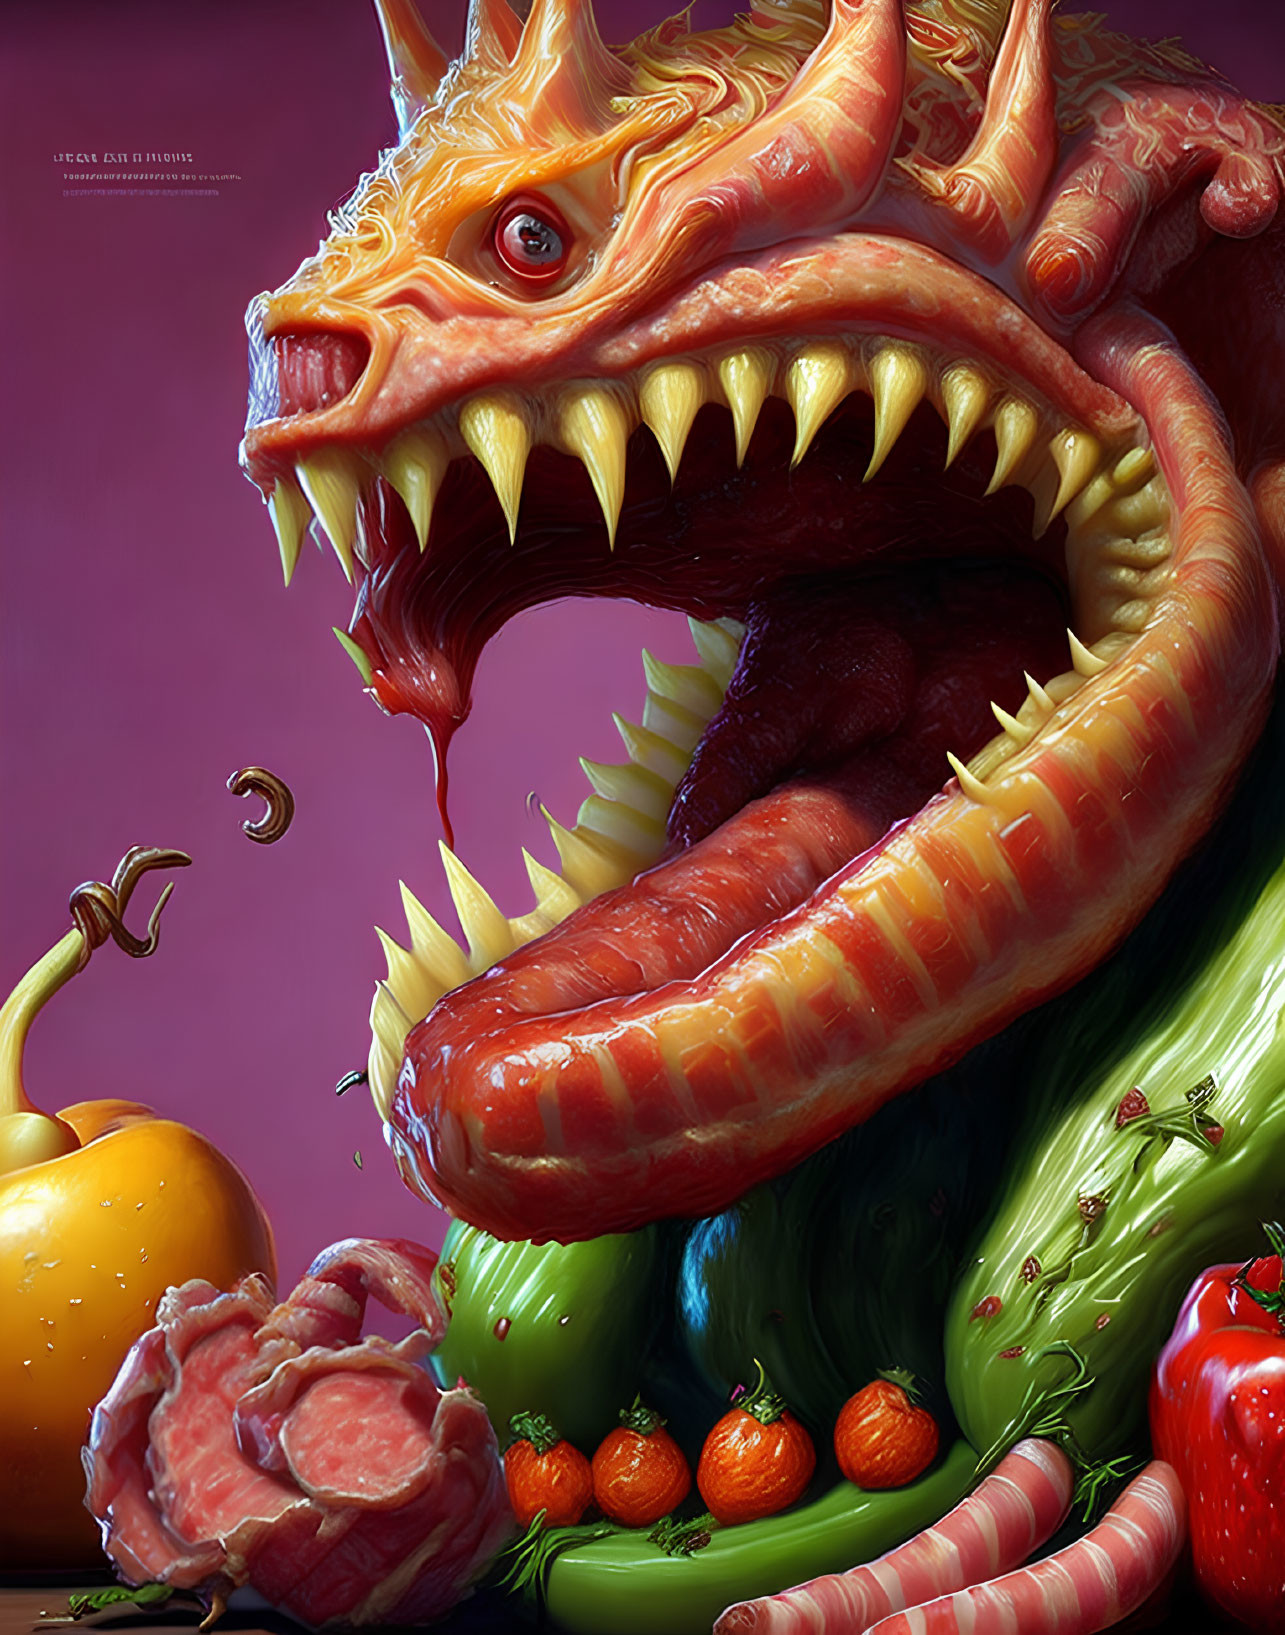 Colorful Dragon Illustration with Intricate Scales and Sharp Teeth Surrounded by Fruit and Meat